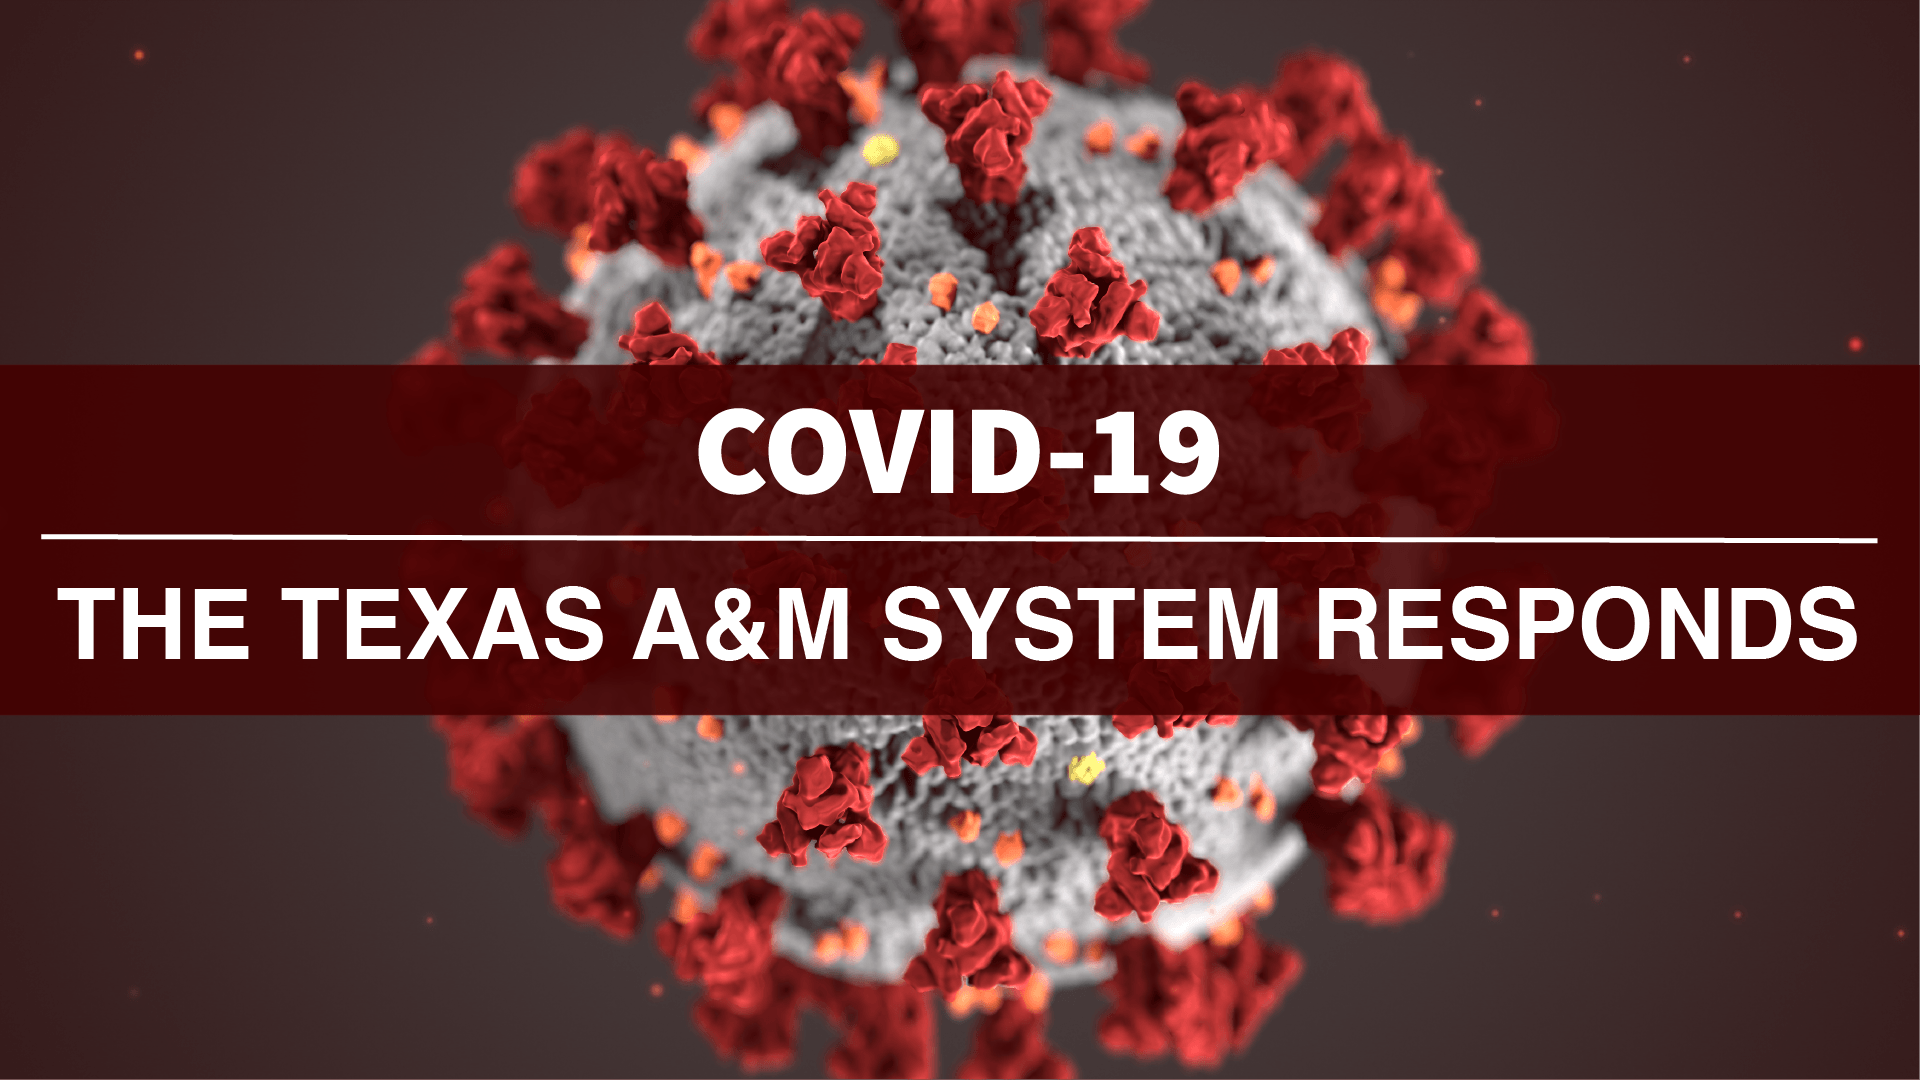 COVID-19: The Texas A&M System Responds